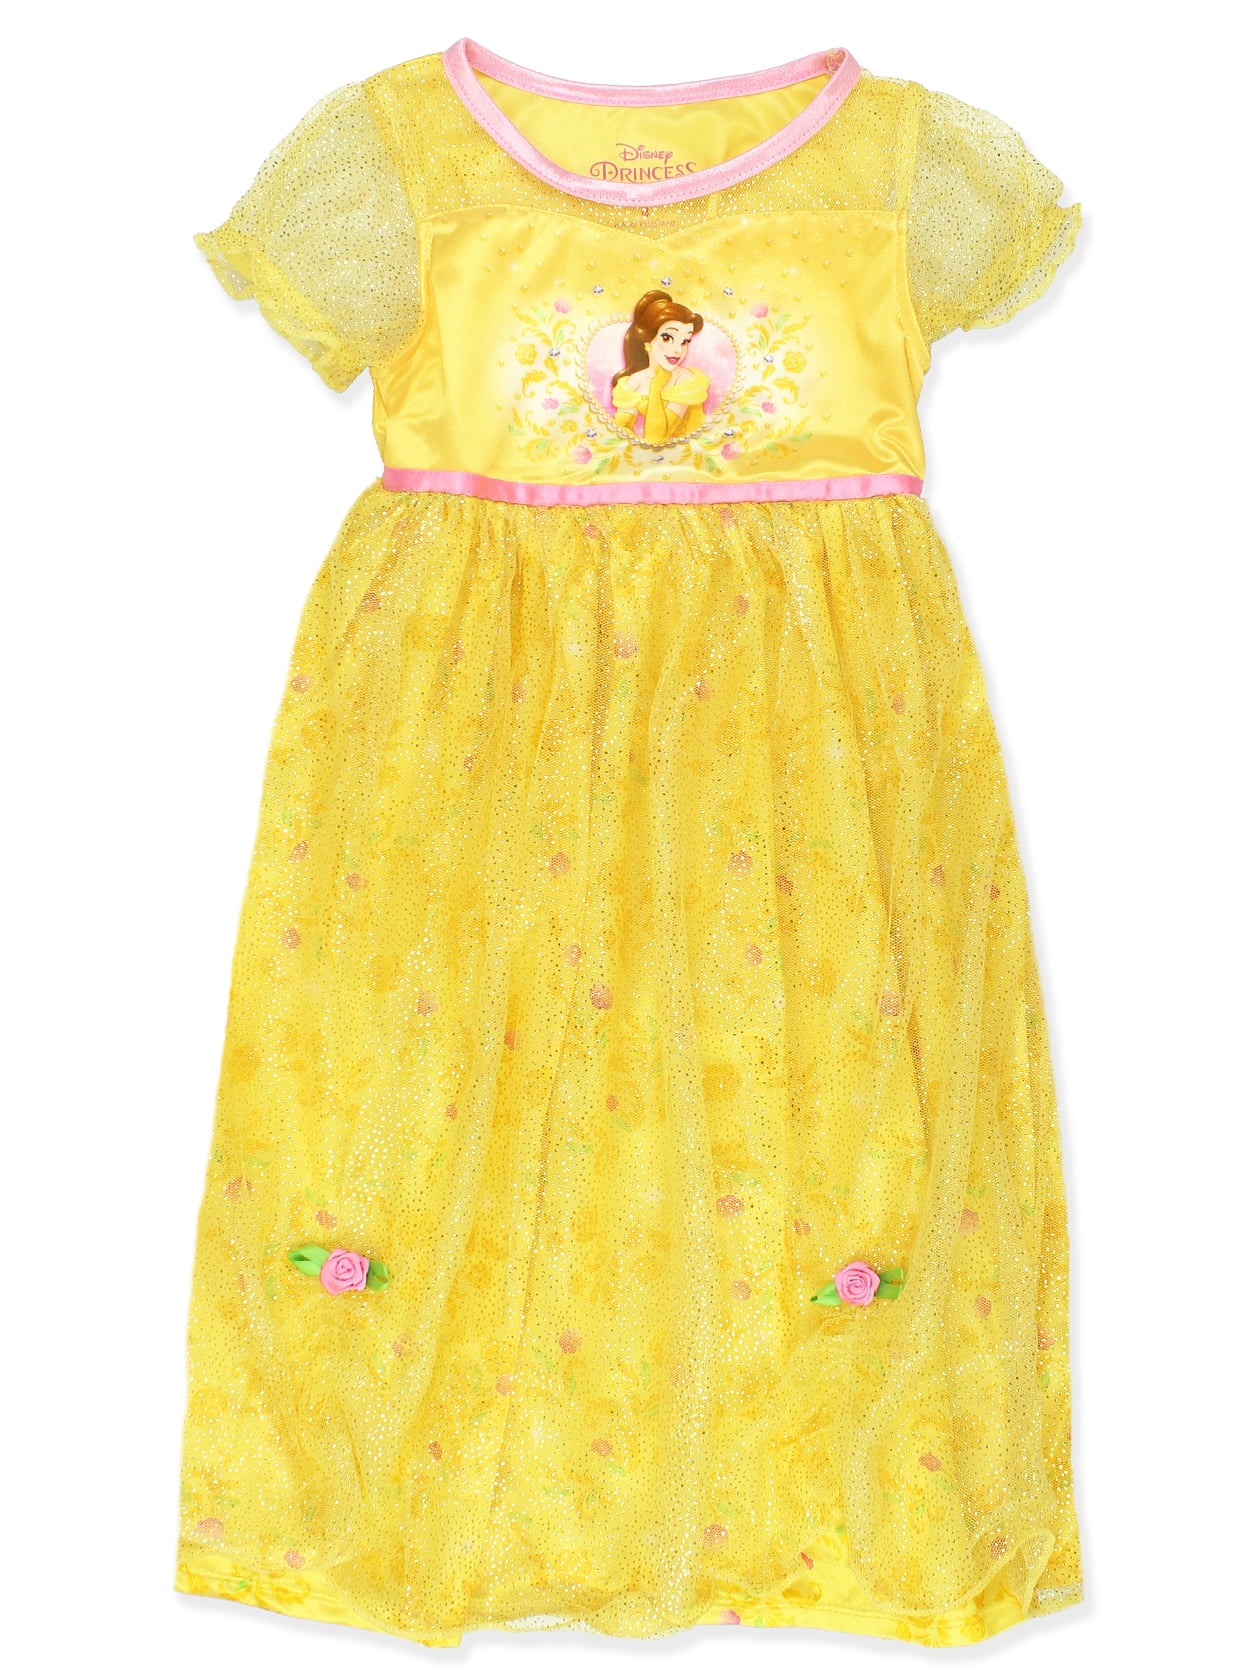 BELLE & PHILIPPE ^ DISNEY Store NIGHTSHIRT for GIRLS NWT 